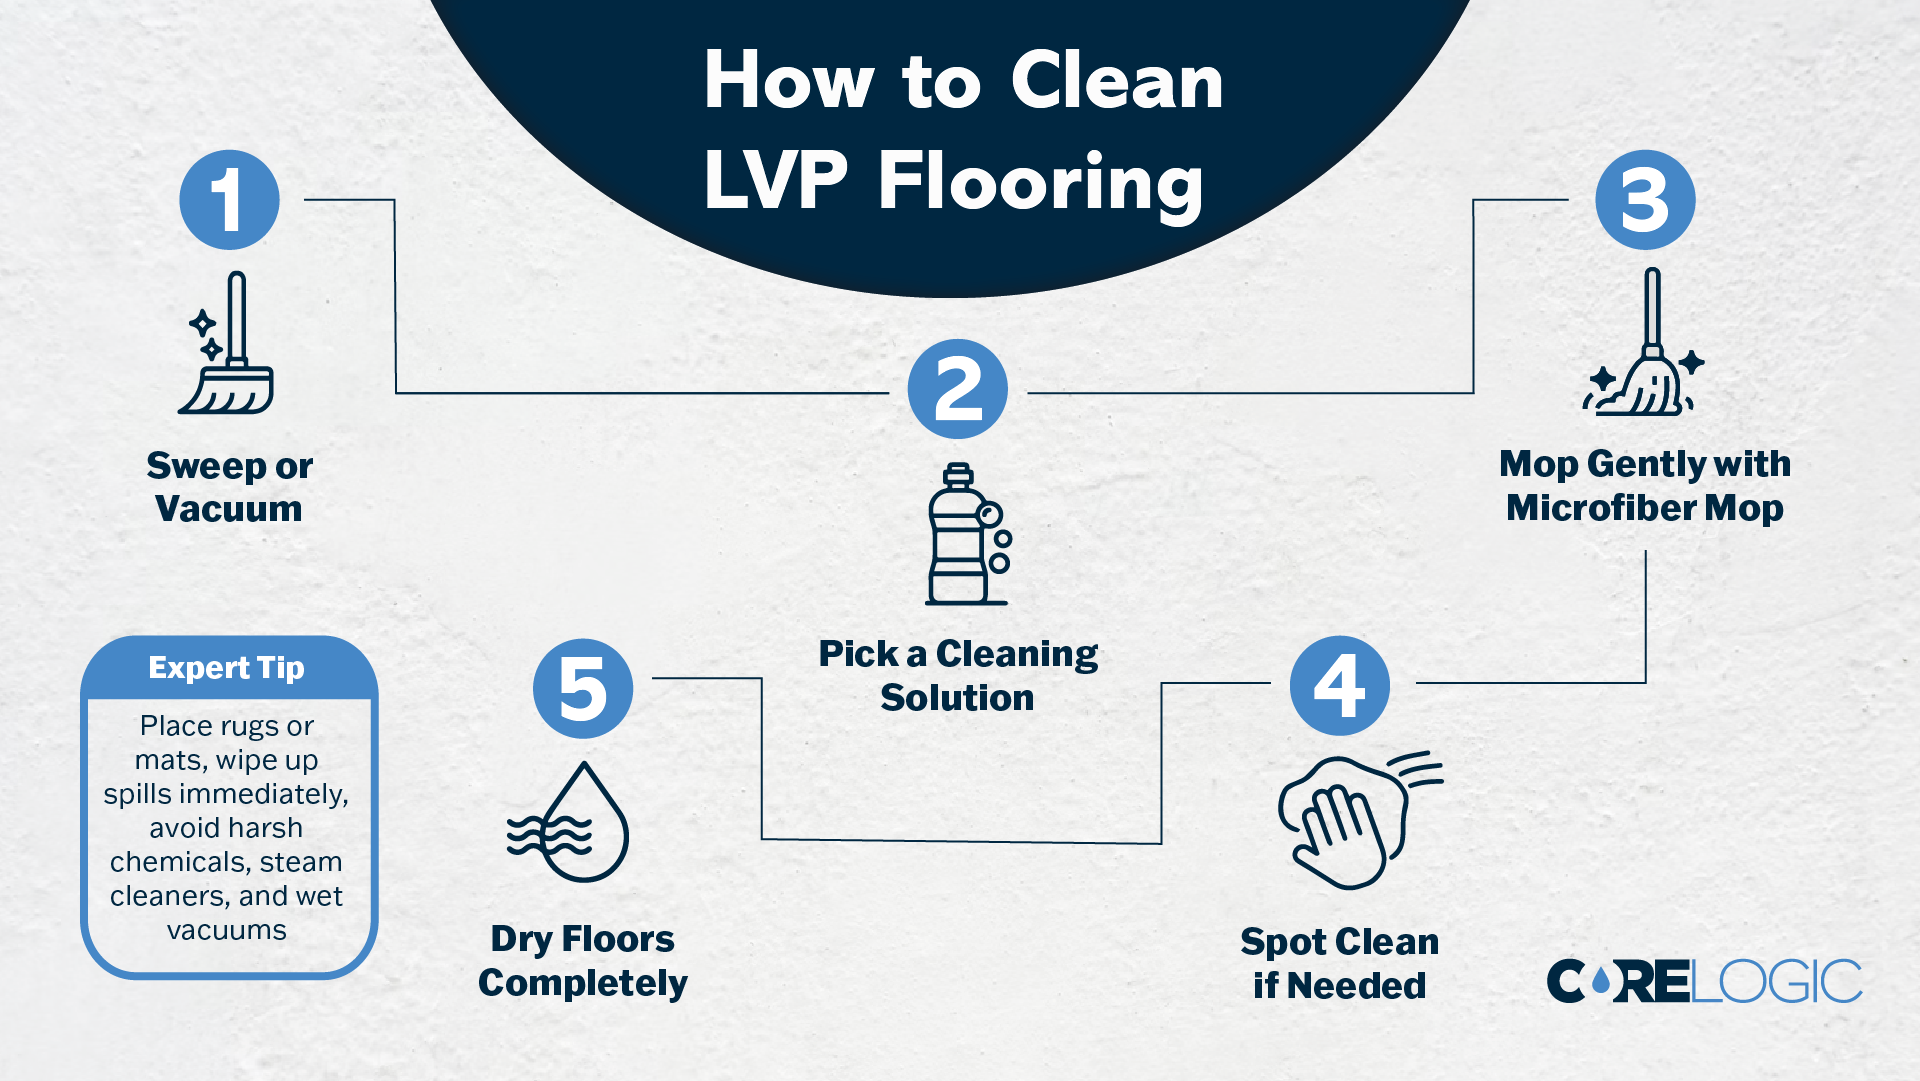 CoreLogic How to Clean LVP Flooring Guide